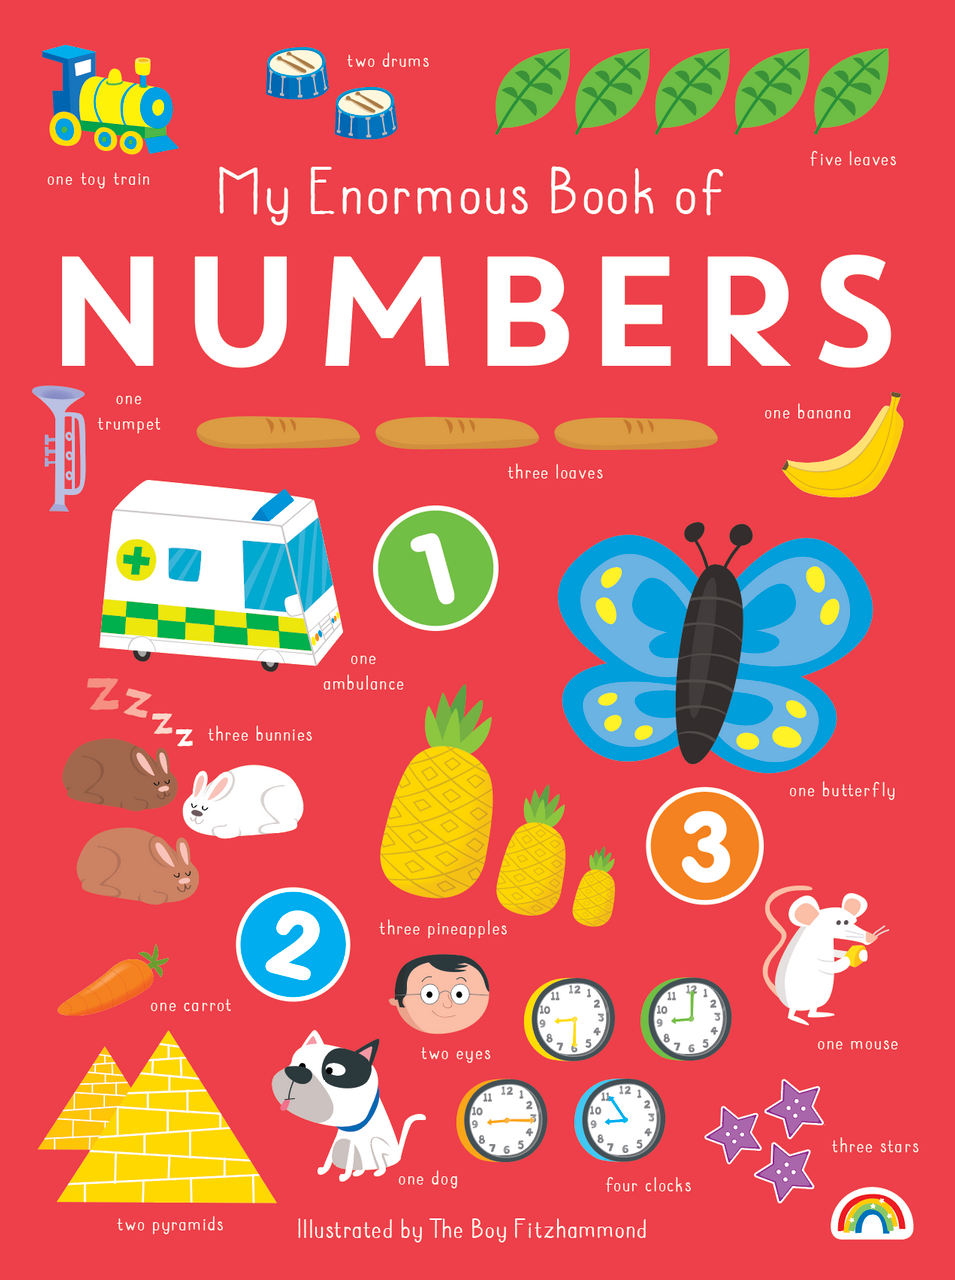 My Enormous Book of Numbers